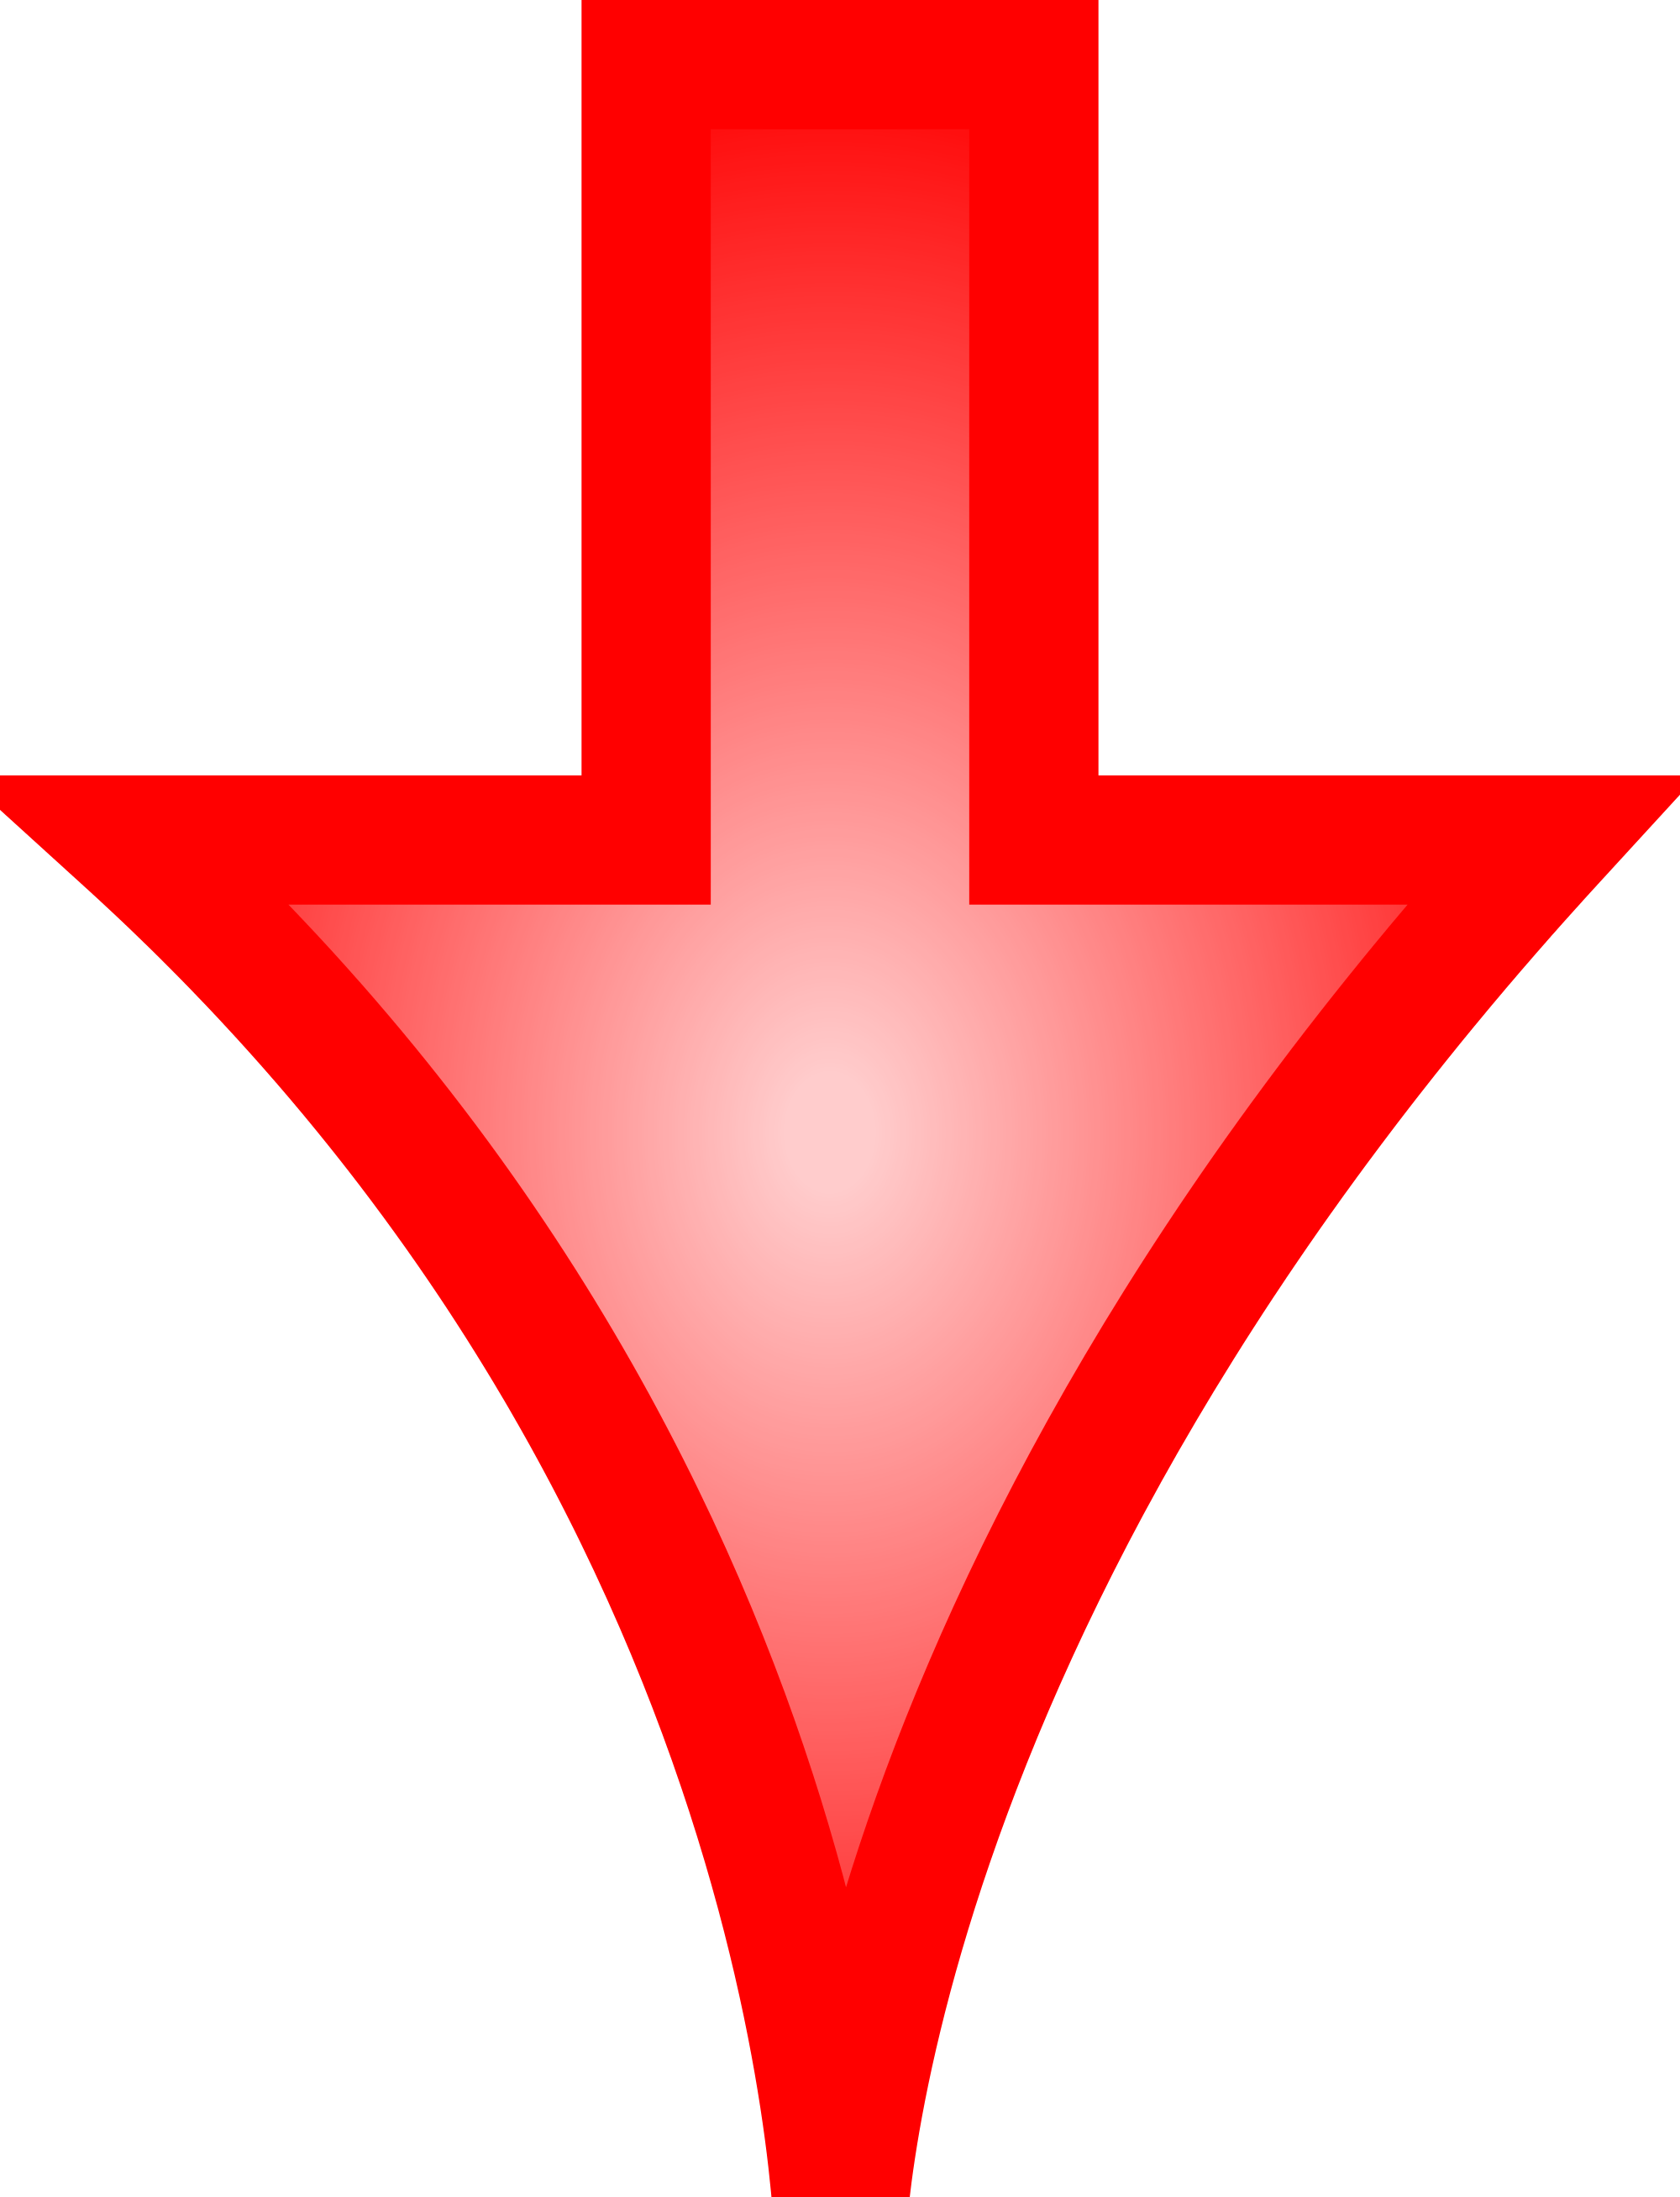 File:Arrow down red.svg - Wikimedia Commons